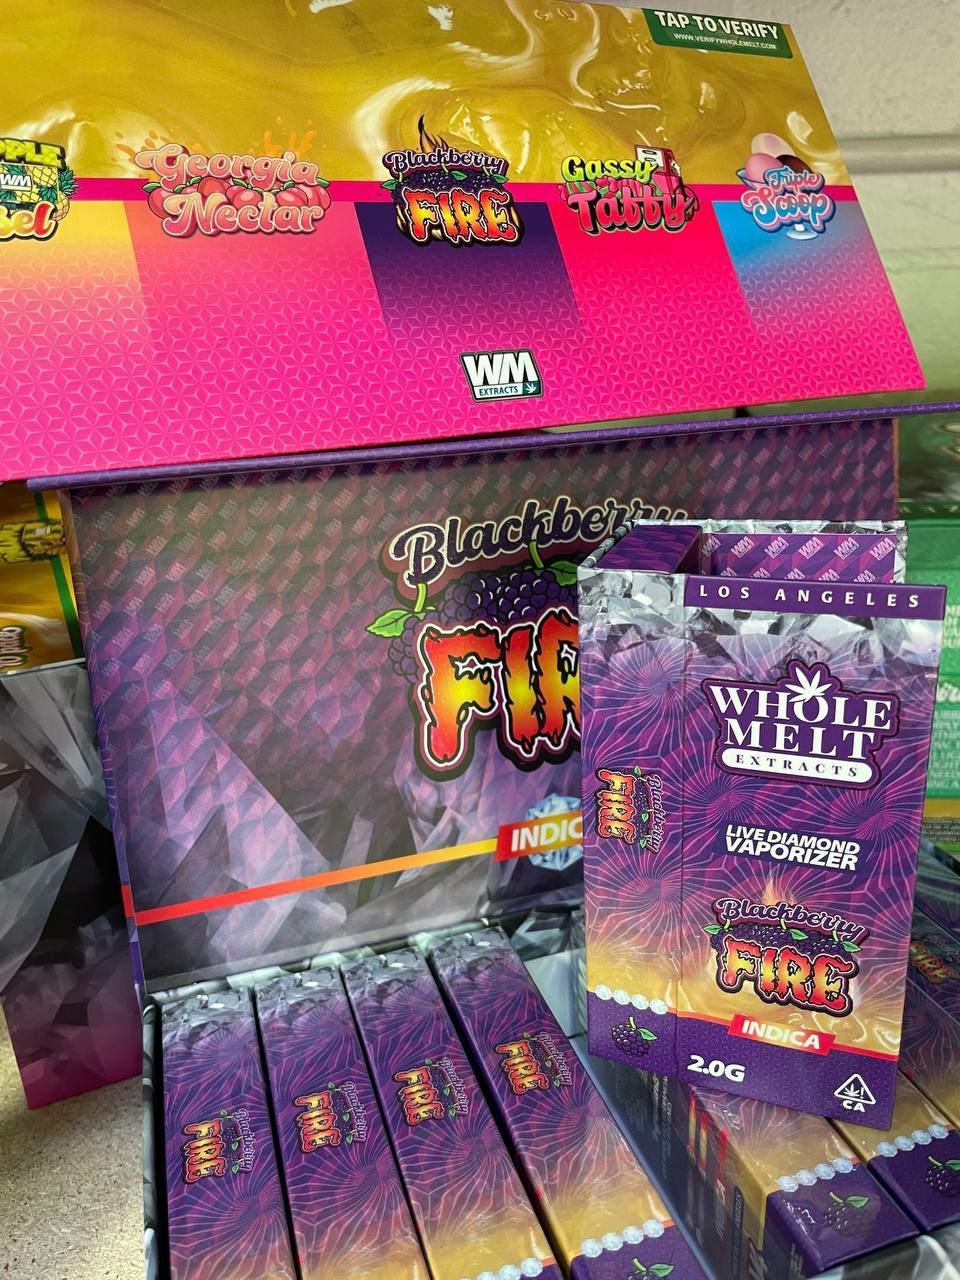 Photo of a display for a cannabis product called "Import placeholder for 50," by Whole Melt Extracts. The packaging is purple with a flame design. The display includes various strains and a box indicating it’s a live diamond vaporizer, indica, 2.0 grams.